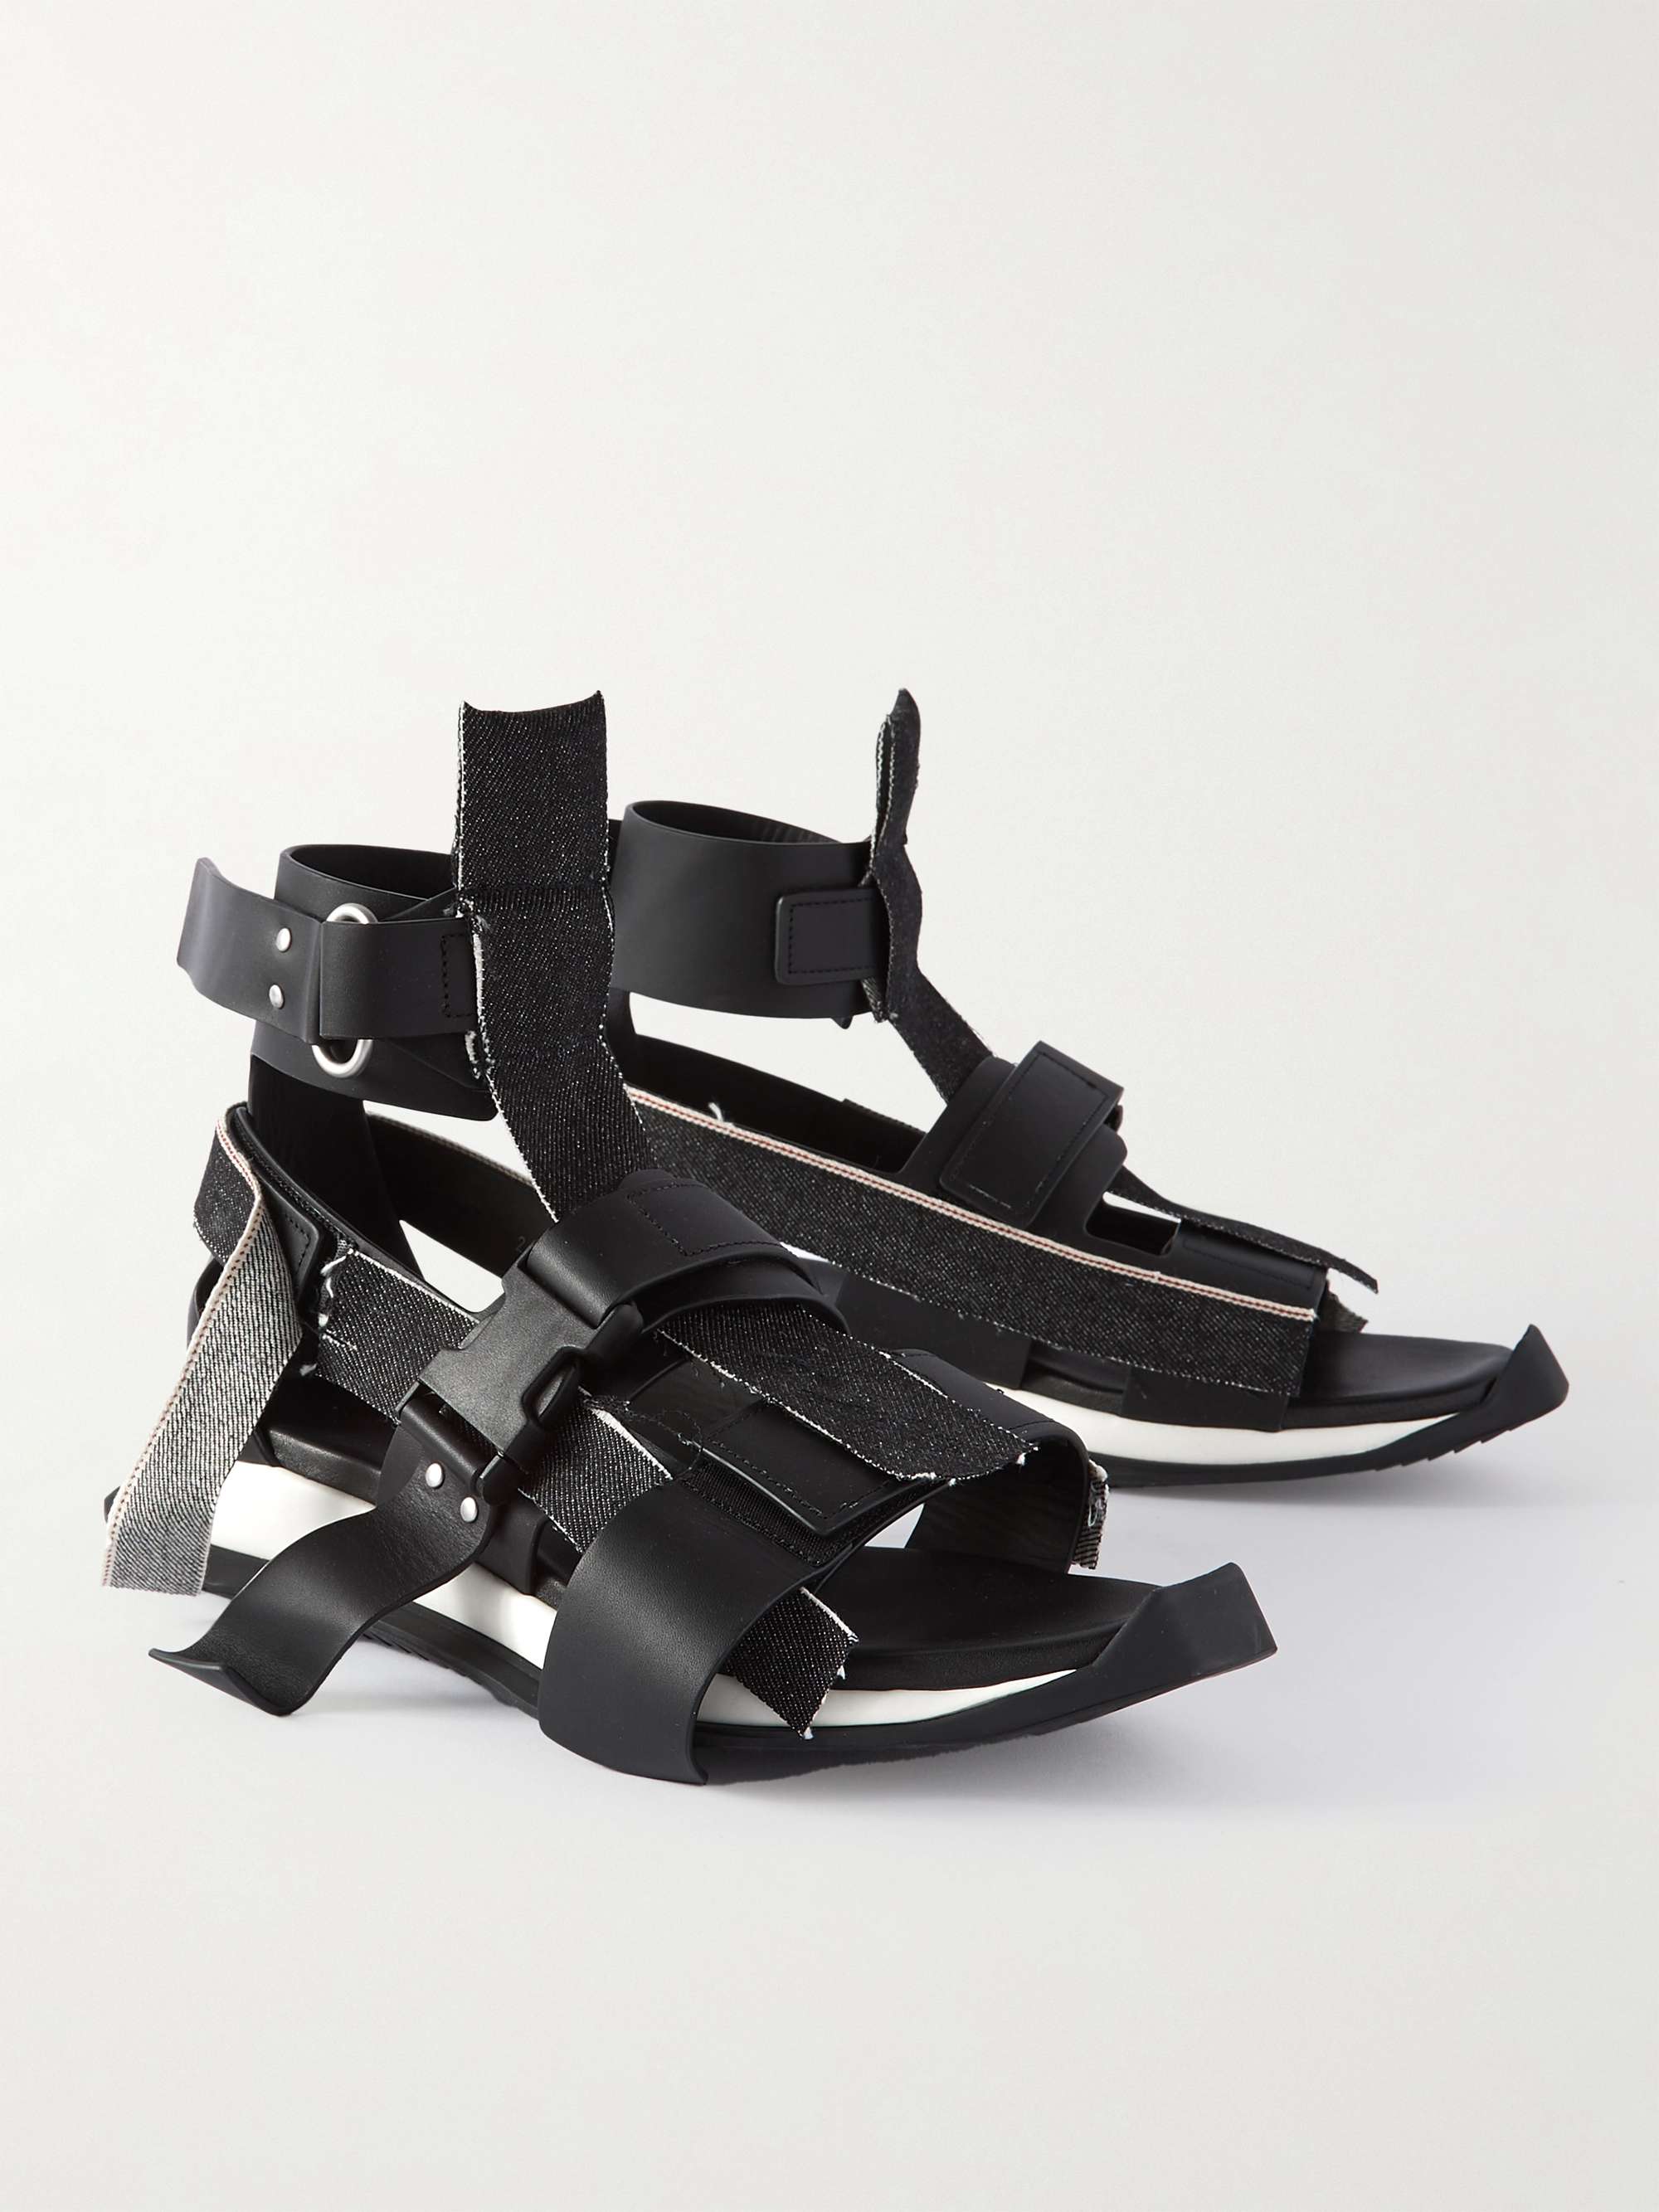 RICK OWENS + Swampgod Upcycled Frayed Denim and Leather Sandals